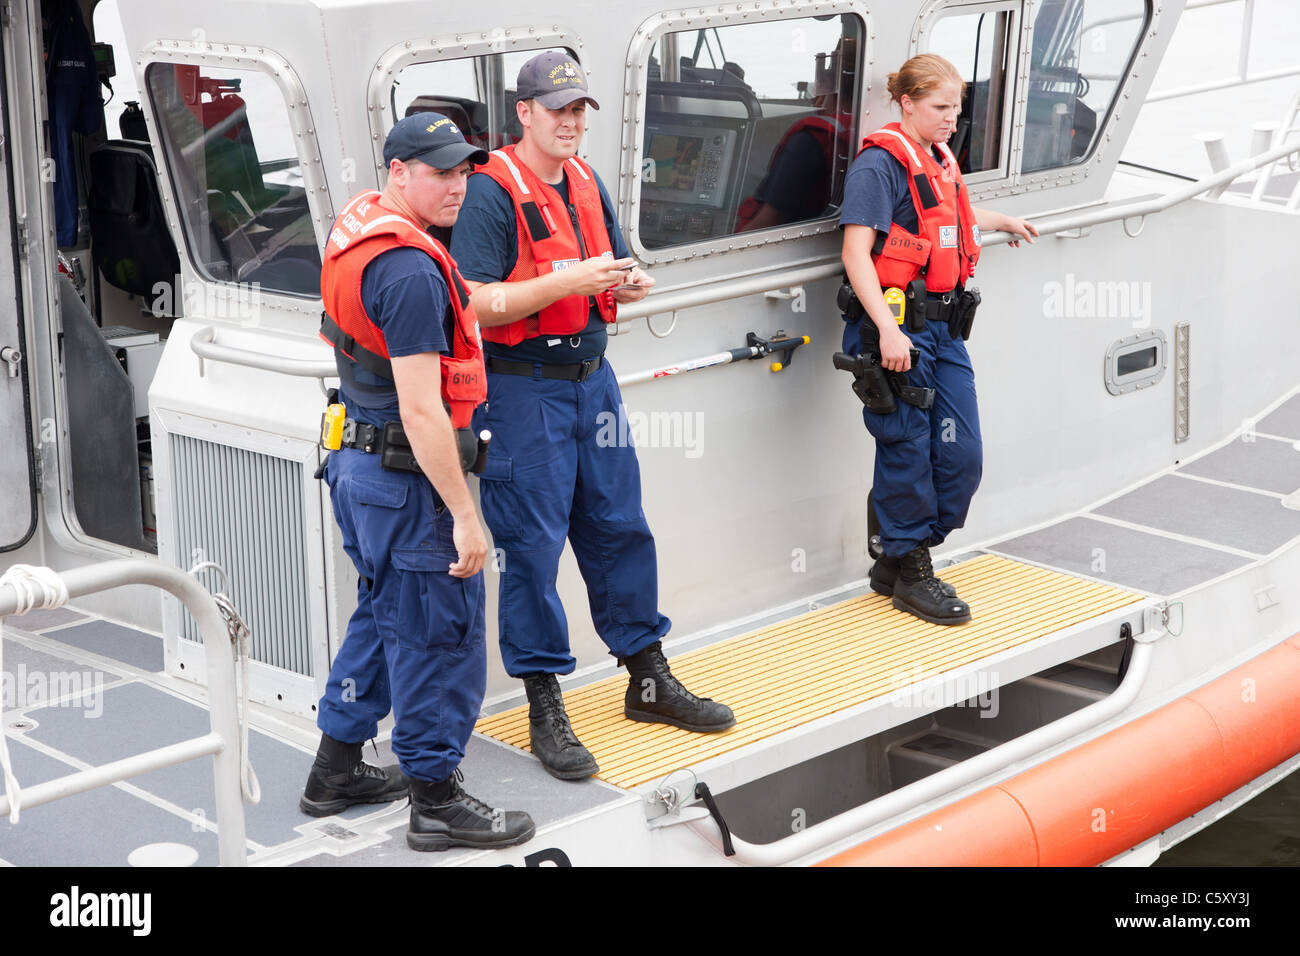 The crew of the US Coast Guard Response Boat-Medium (RB-M) 45610 helps a stranded boater on Kill Van Kull in Bayonne, New Jersey. Stock Photo